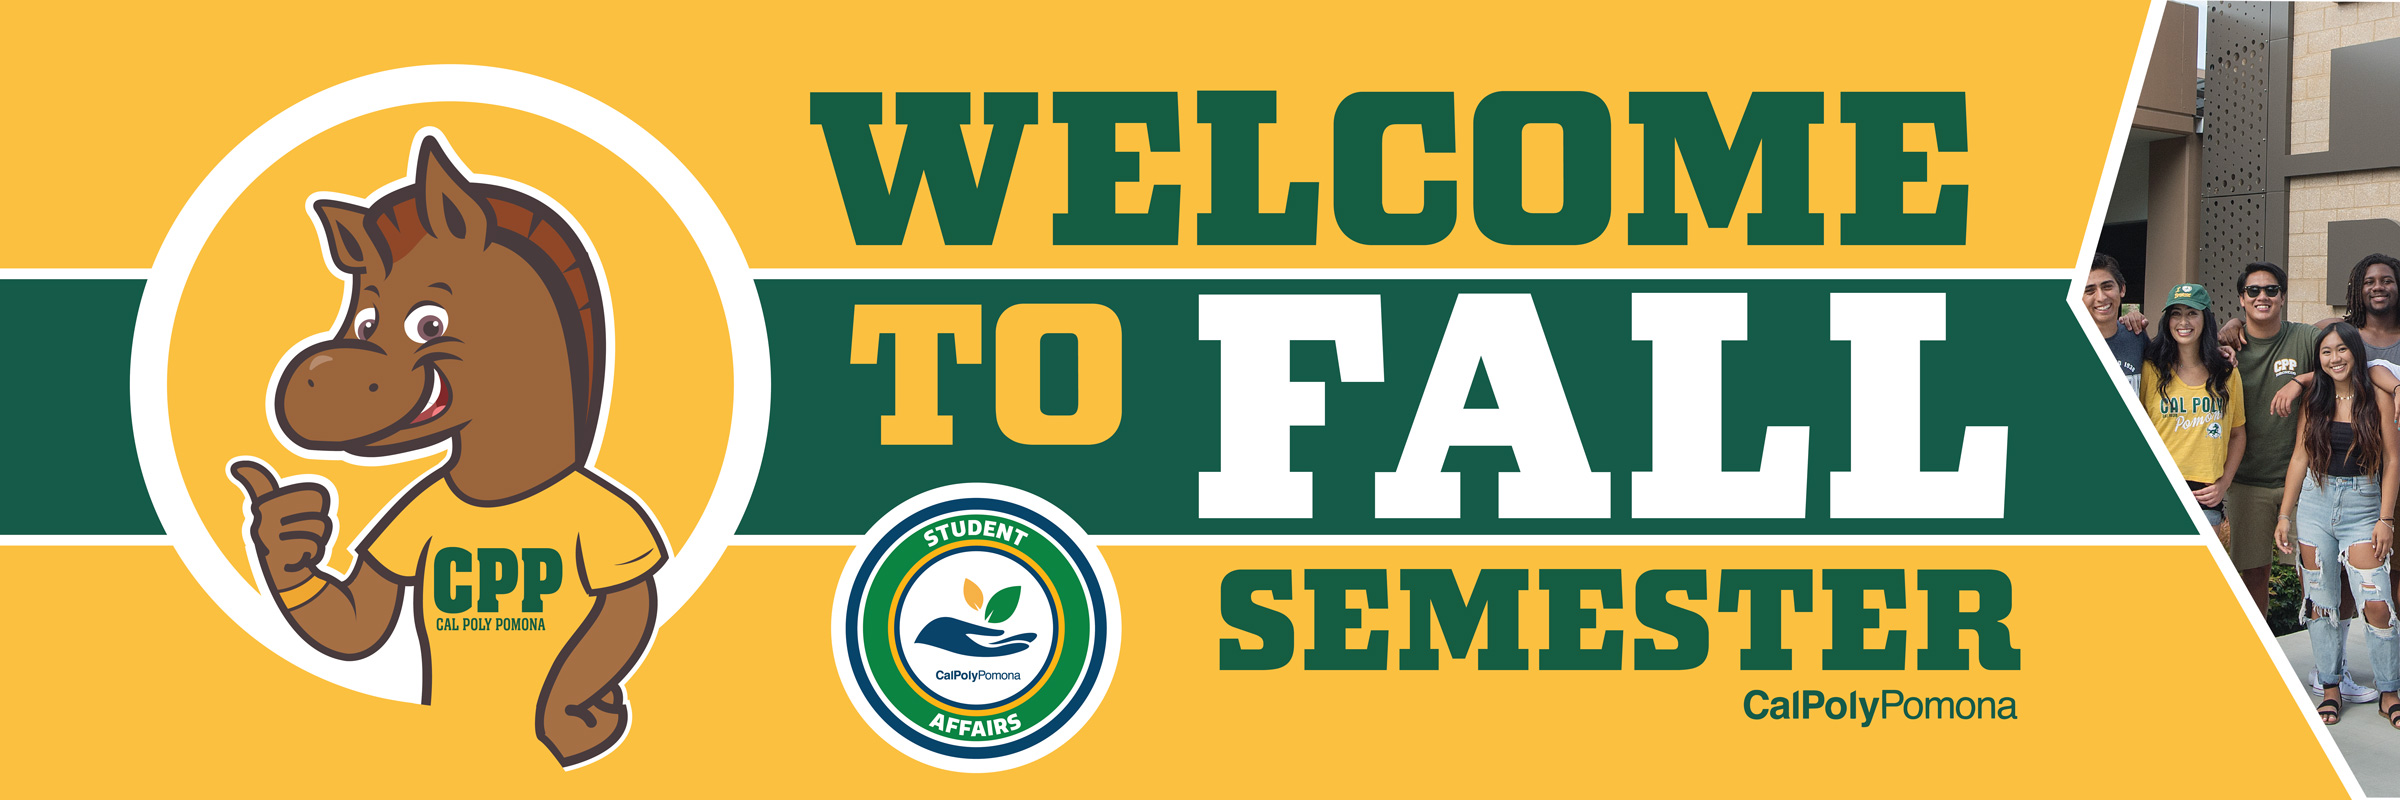 Welcome to fall semester banner